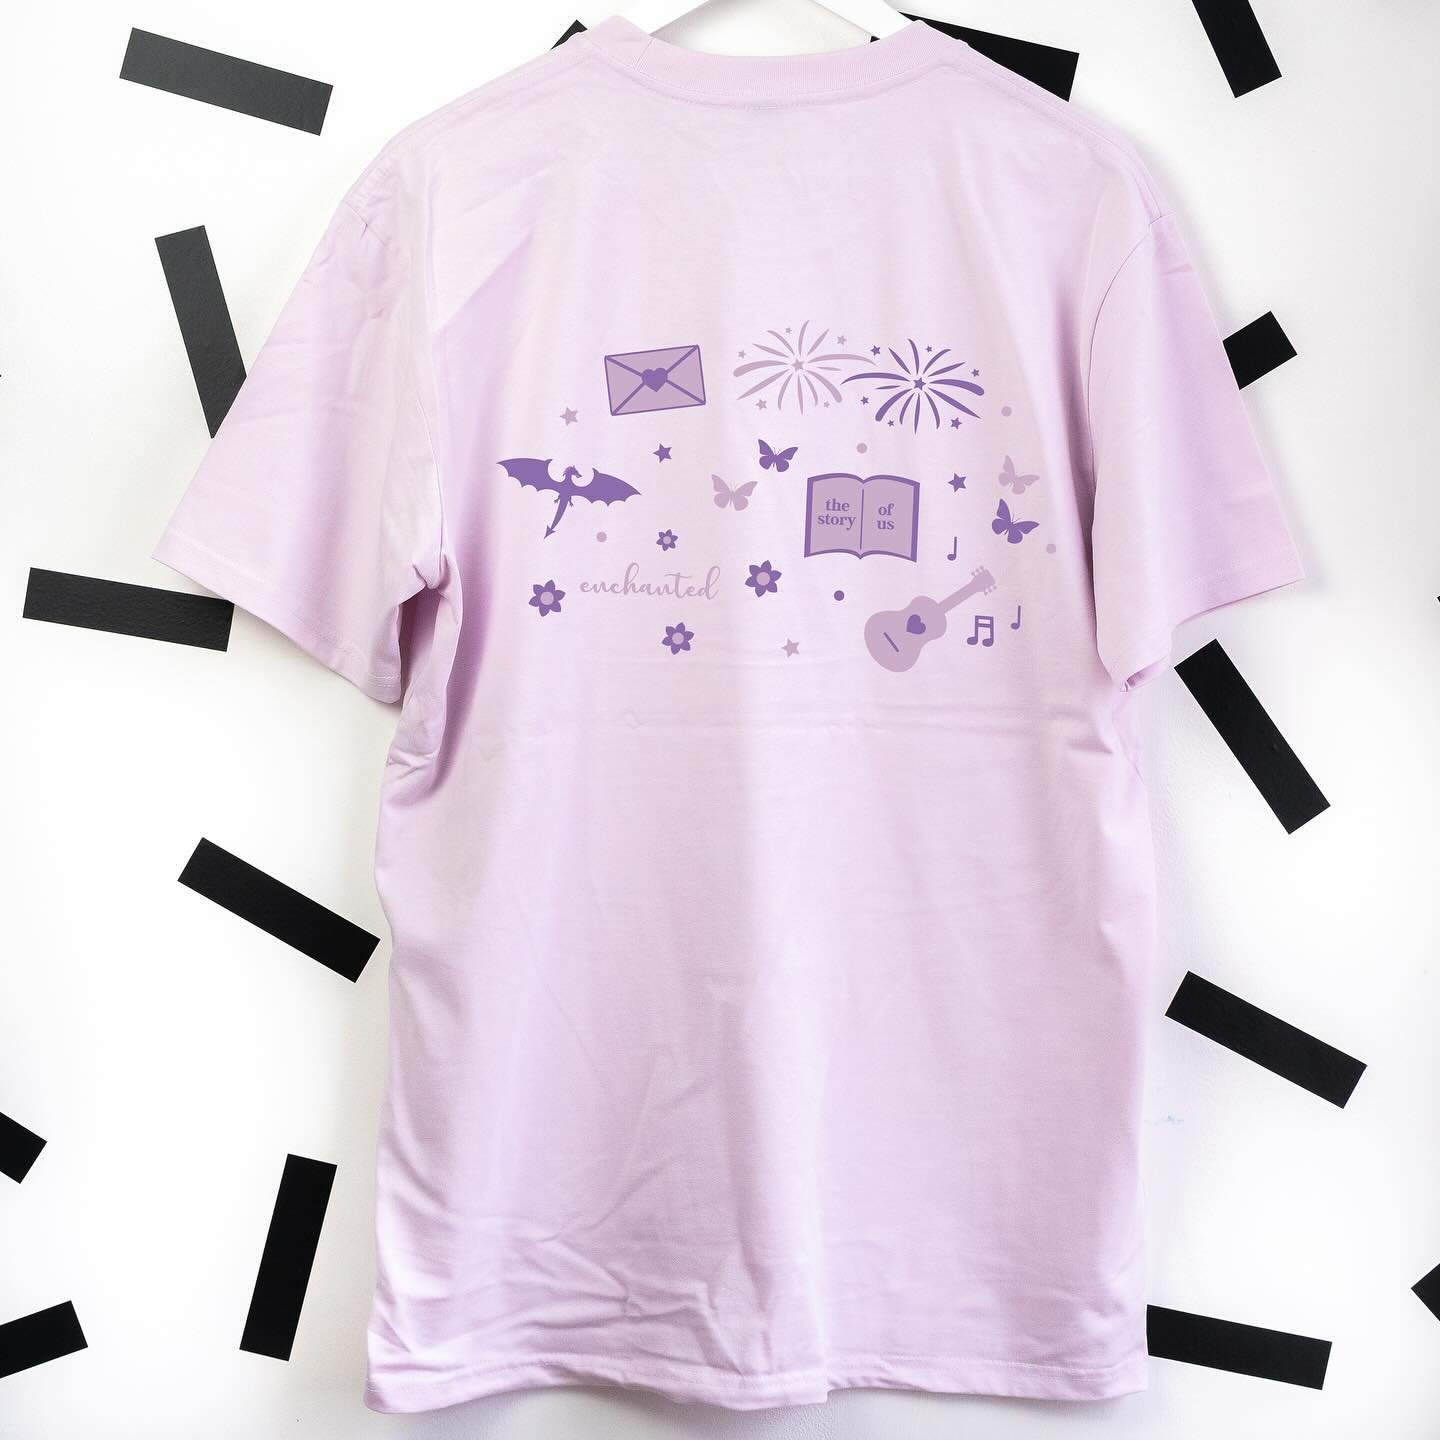 Long live all the magic we made! ✨

Introducing the third tee in our TS collection our &ldquo;Speak Now&rdquo; lilac t-shirt - featuring embroidered text and iconic song illustrations on the back. Only true Swifties will unravel the hidden messages i